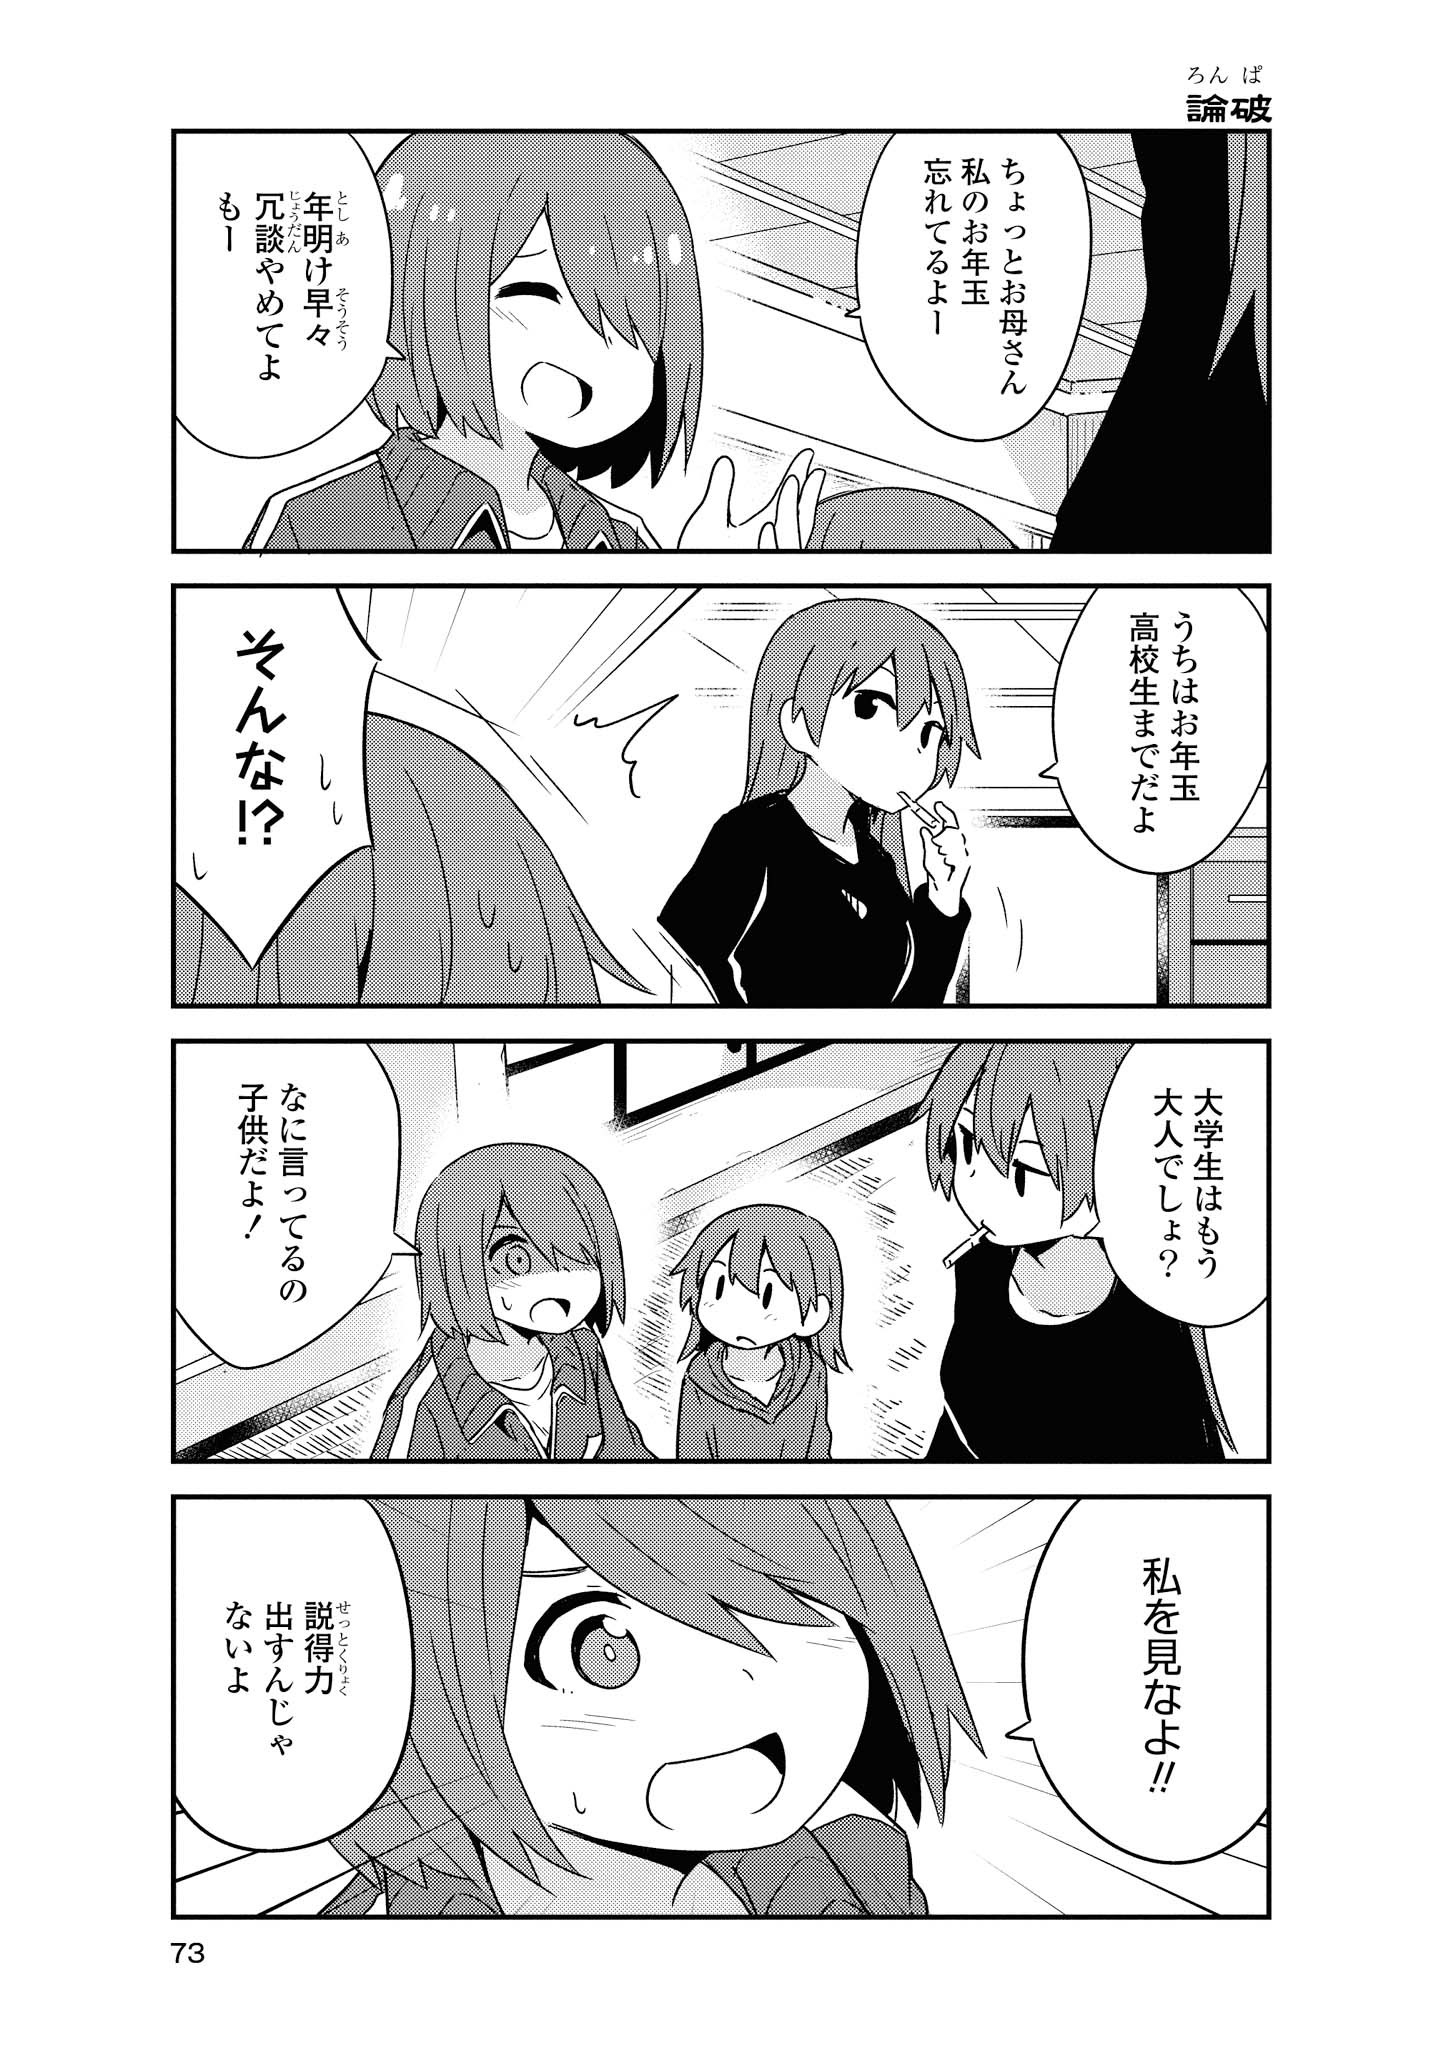 Wataten! An Angel Flew Down to Me 私に天使が舞い降りた！ 第48話 - Page 3